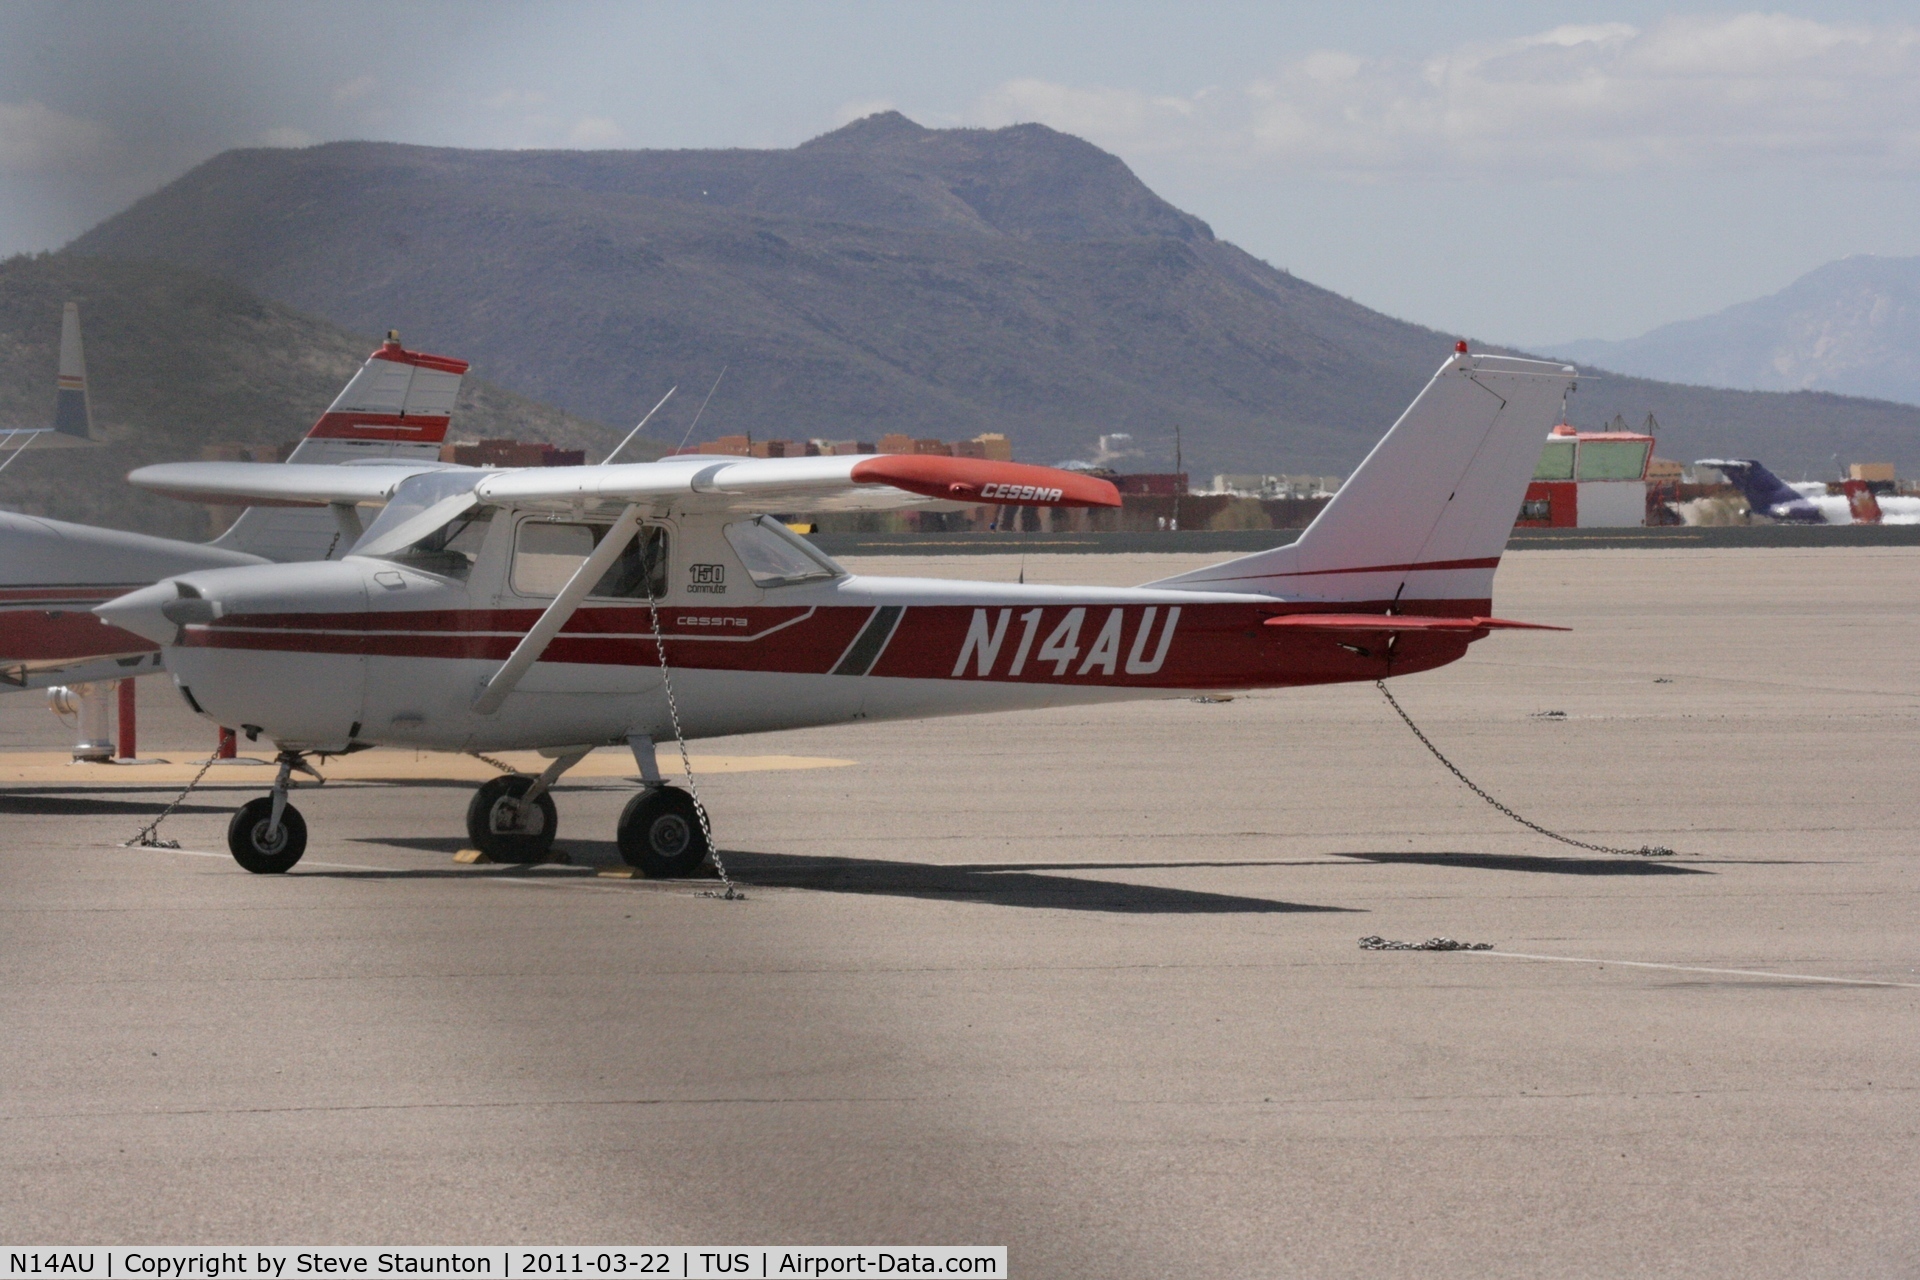 N14AU, 1967 Cessna 150G C/N 15064814, Taken at Tucson International Airport, in March 2011 whilst on an Aeroprint Aviation tour